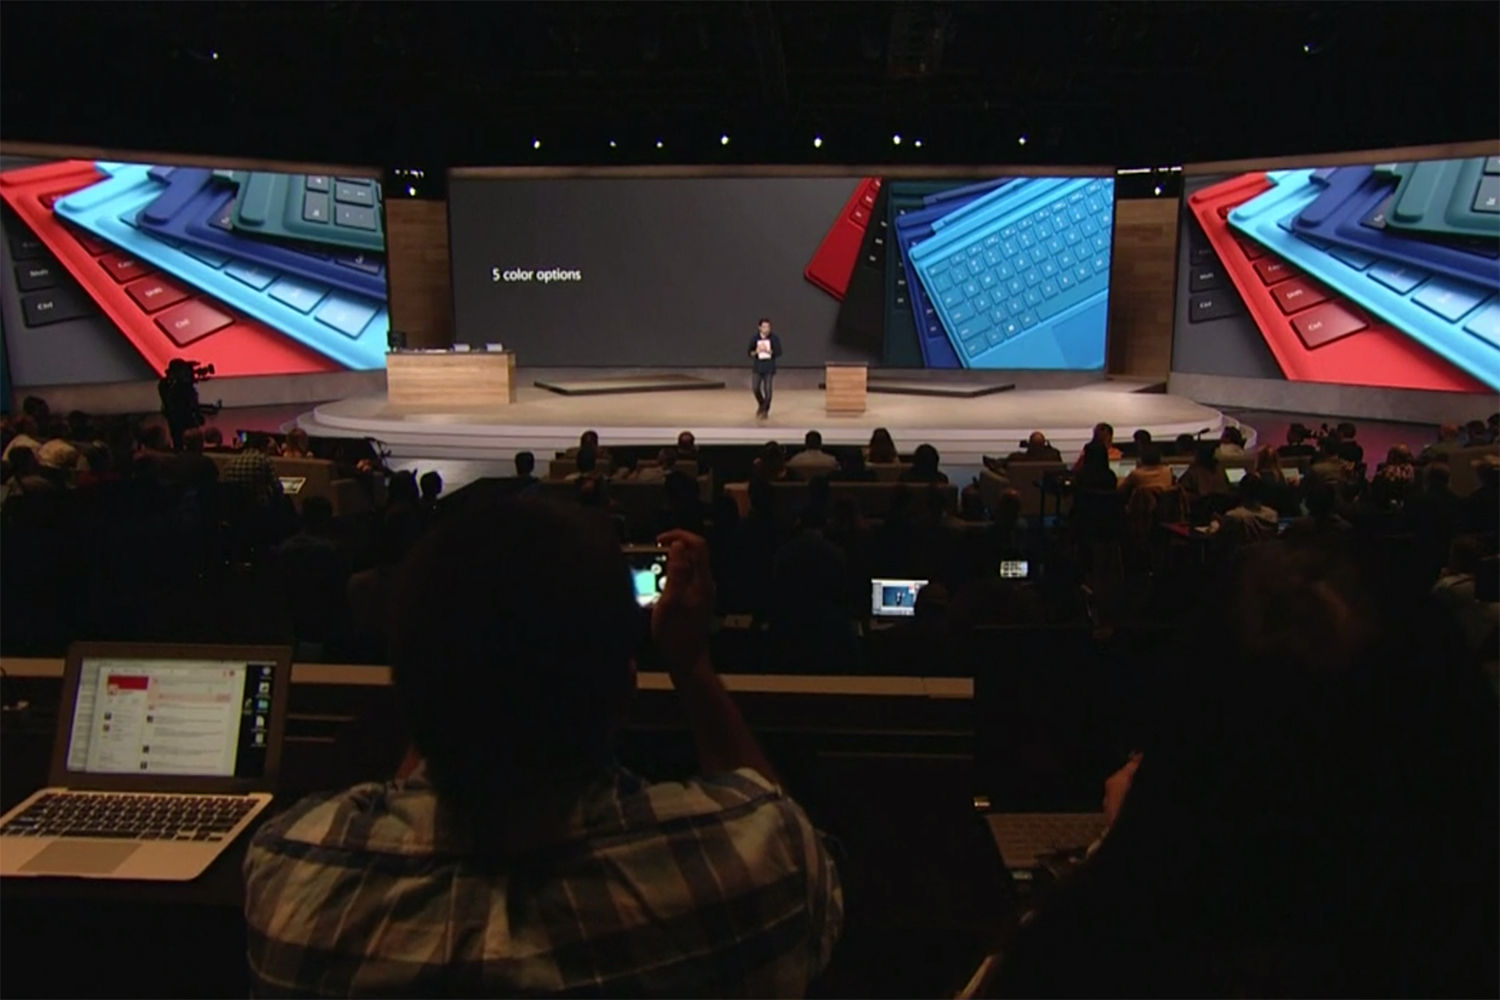 microsofts surface pro 4 rides the wave 3 started surfacepro4